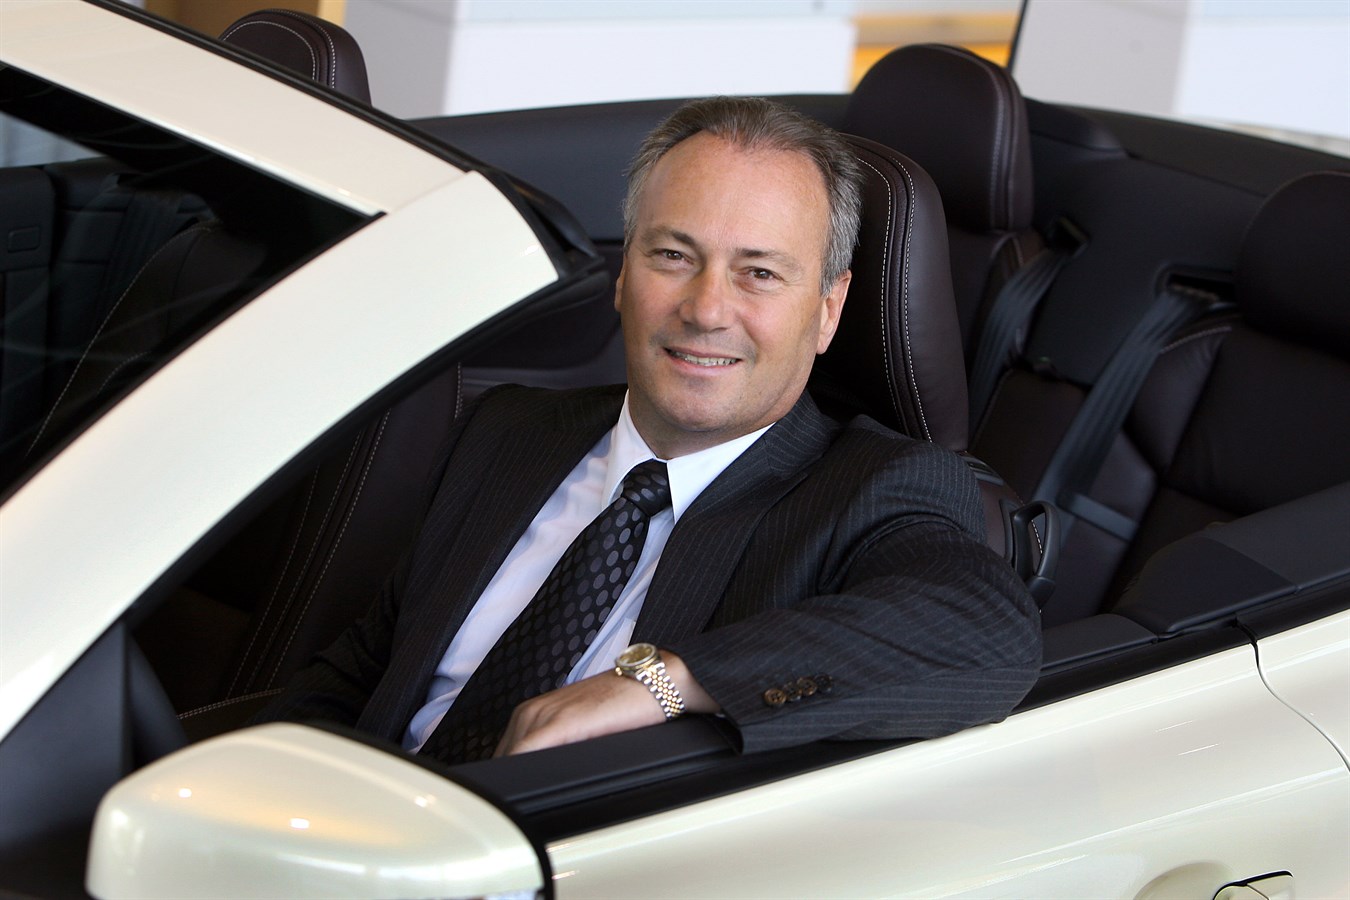 Stephen Odell, President and CEO of Volvo Car Corporation from 1 October 2008 until 2 August 2010.